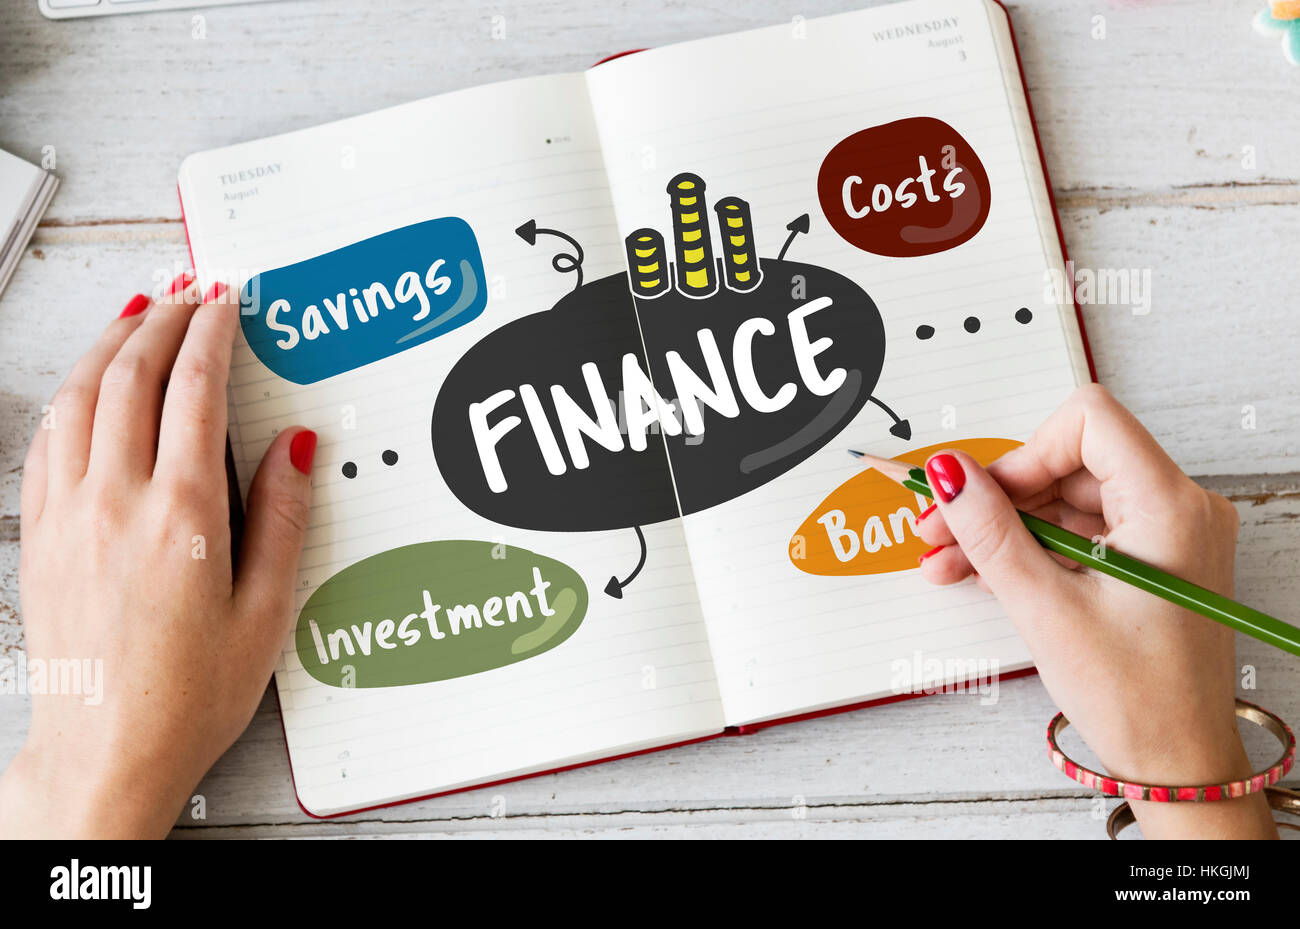 Finance Savings Costs Investment Banking Money Concept Stock Photo